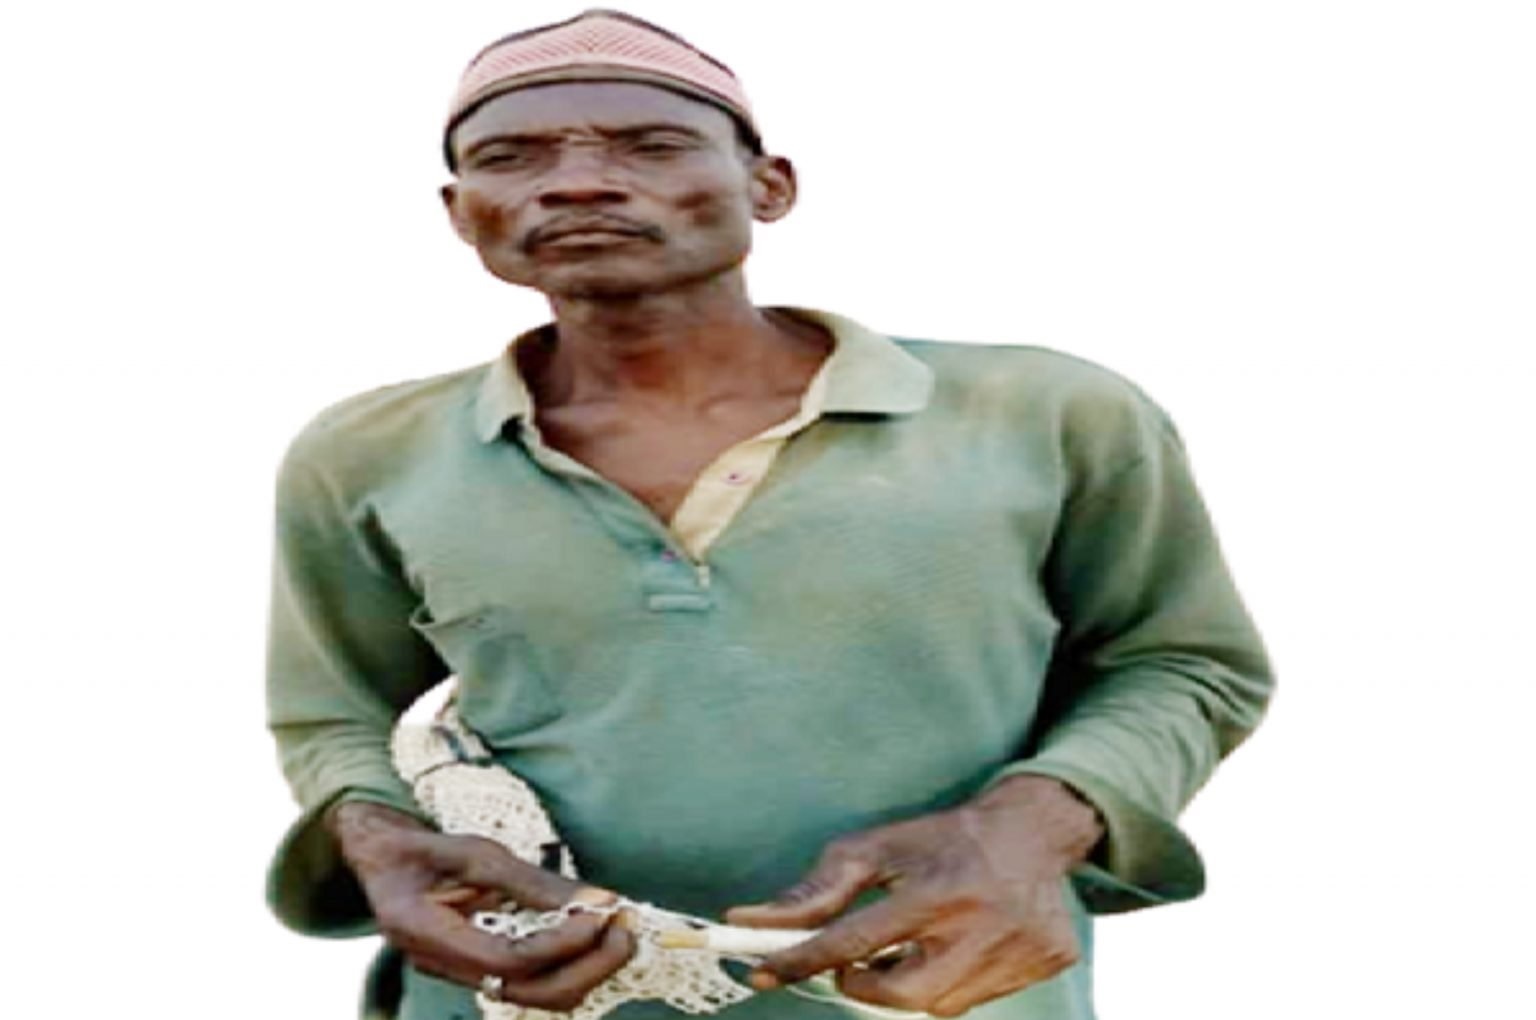 Man set for burial walks out of casket in Nasarawa